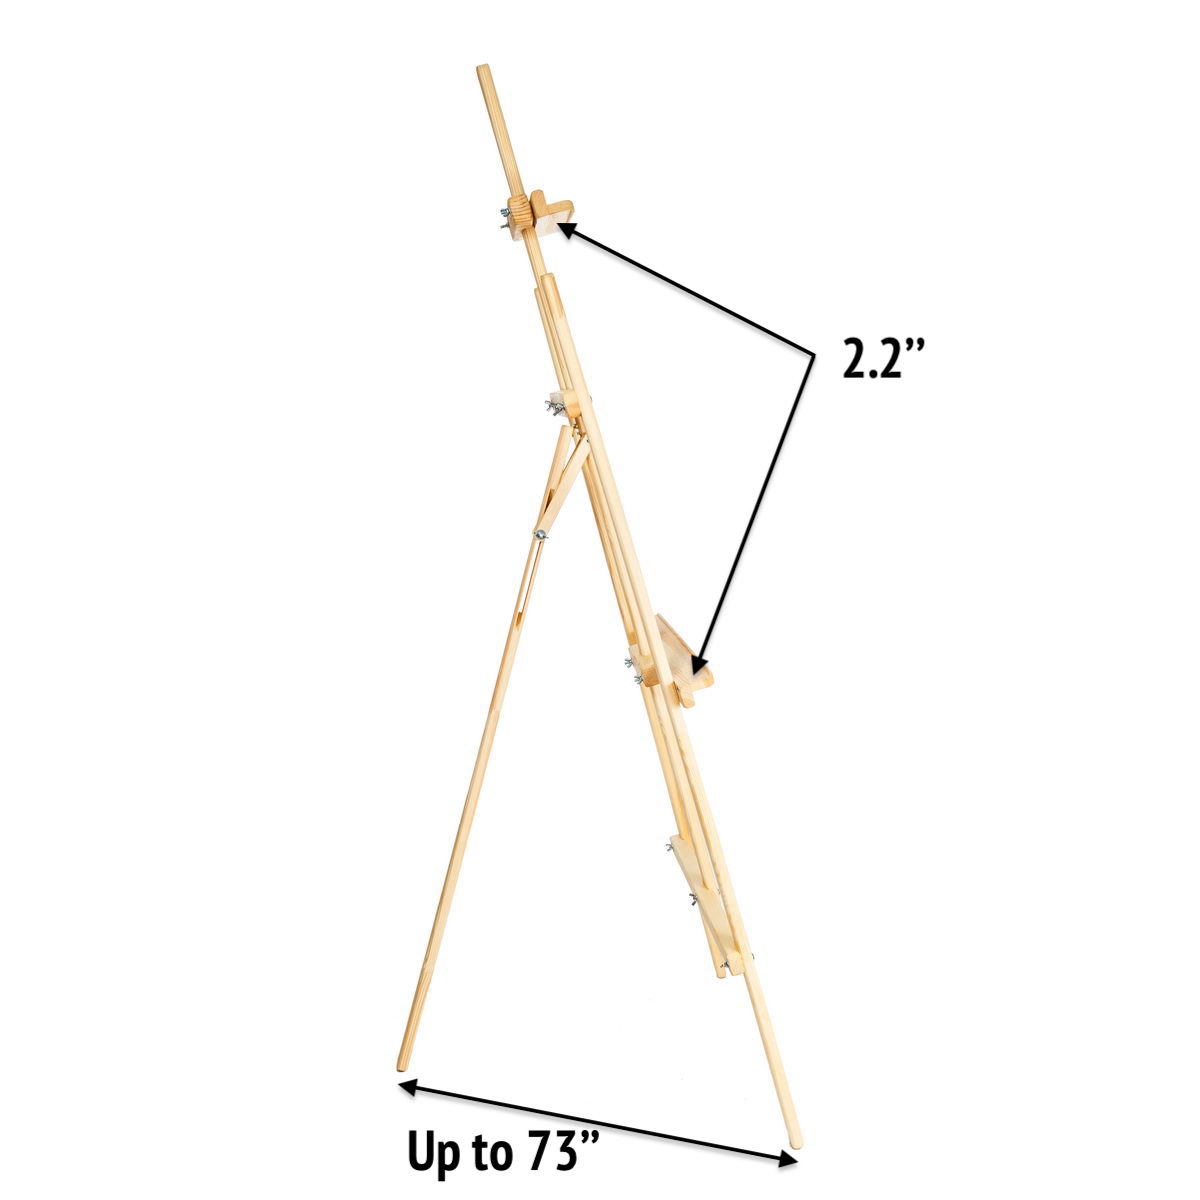  Display Easel Stand